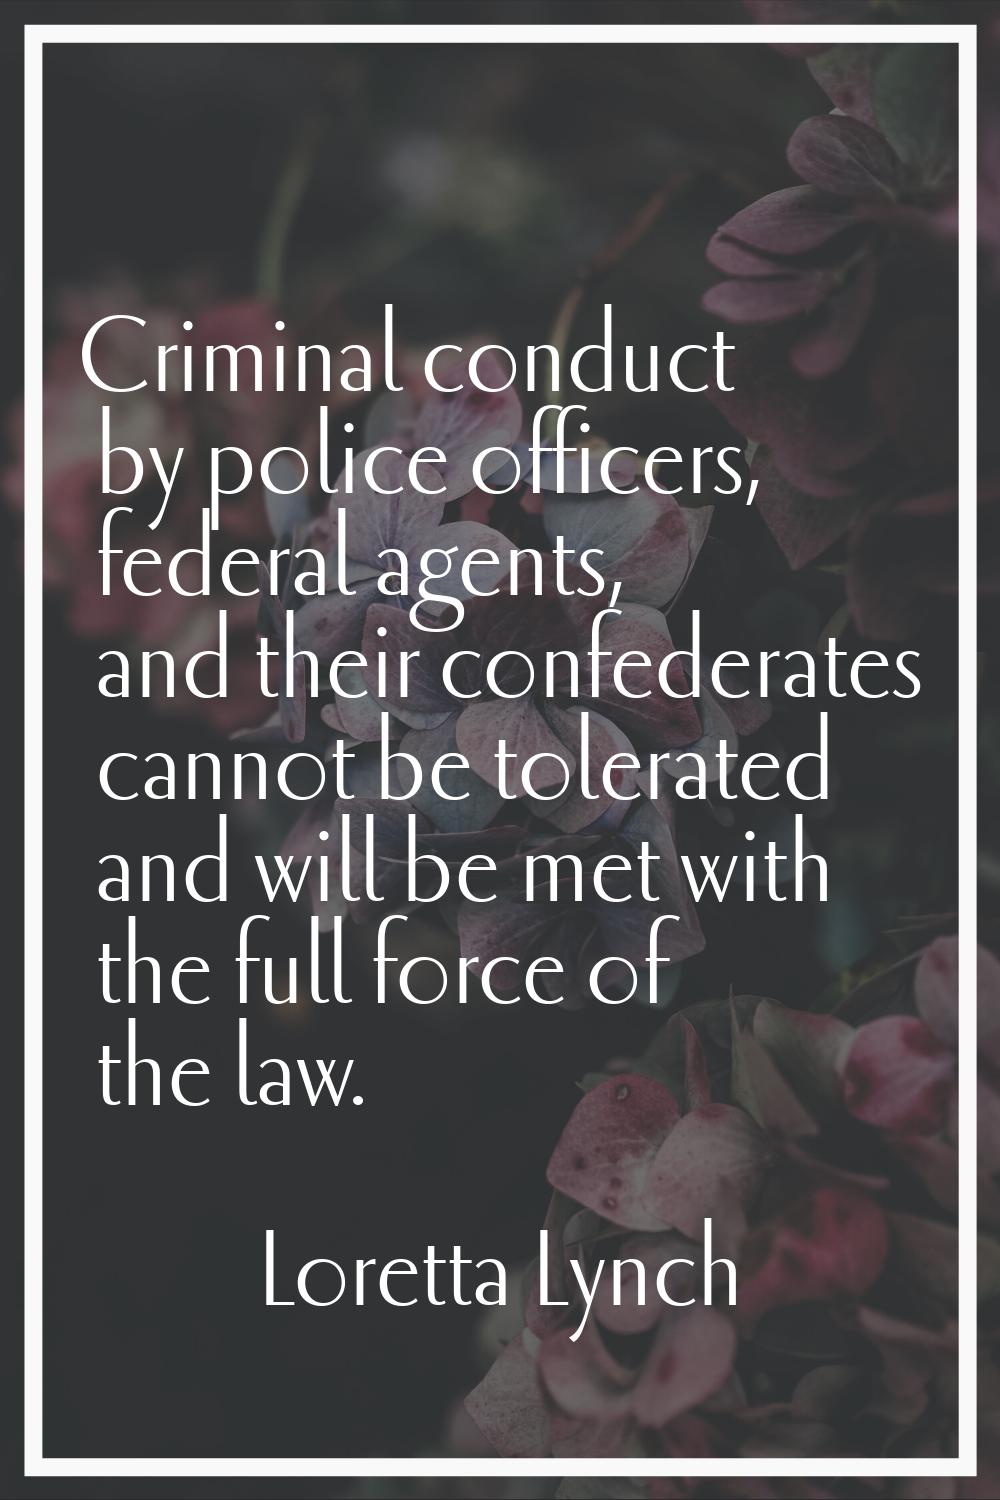 Criminal conduct by police officers, federal agents, and their confederates cannot be tolerated and